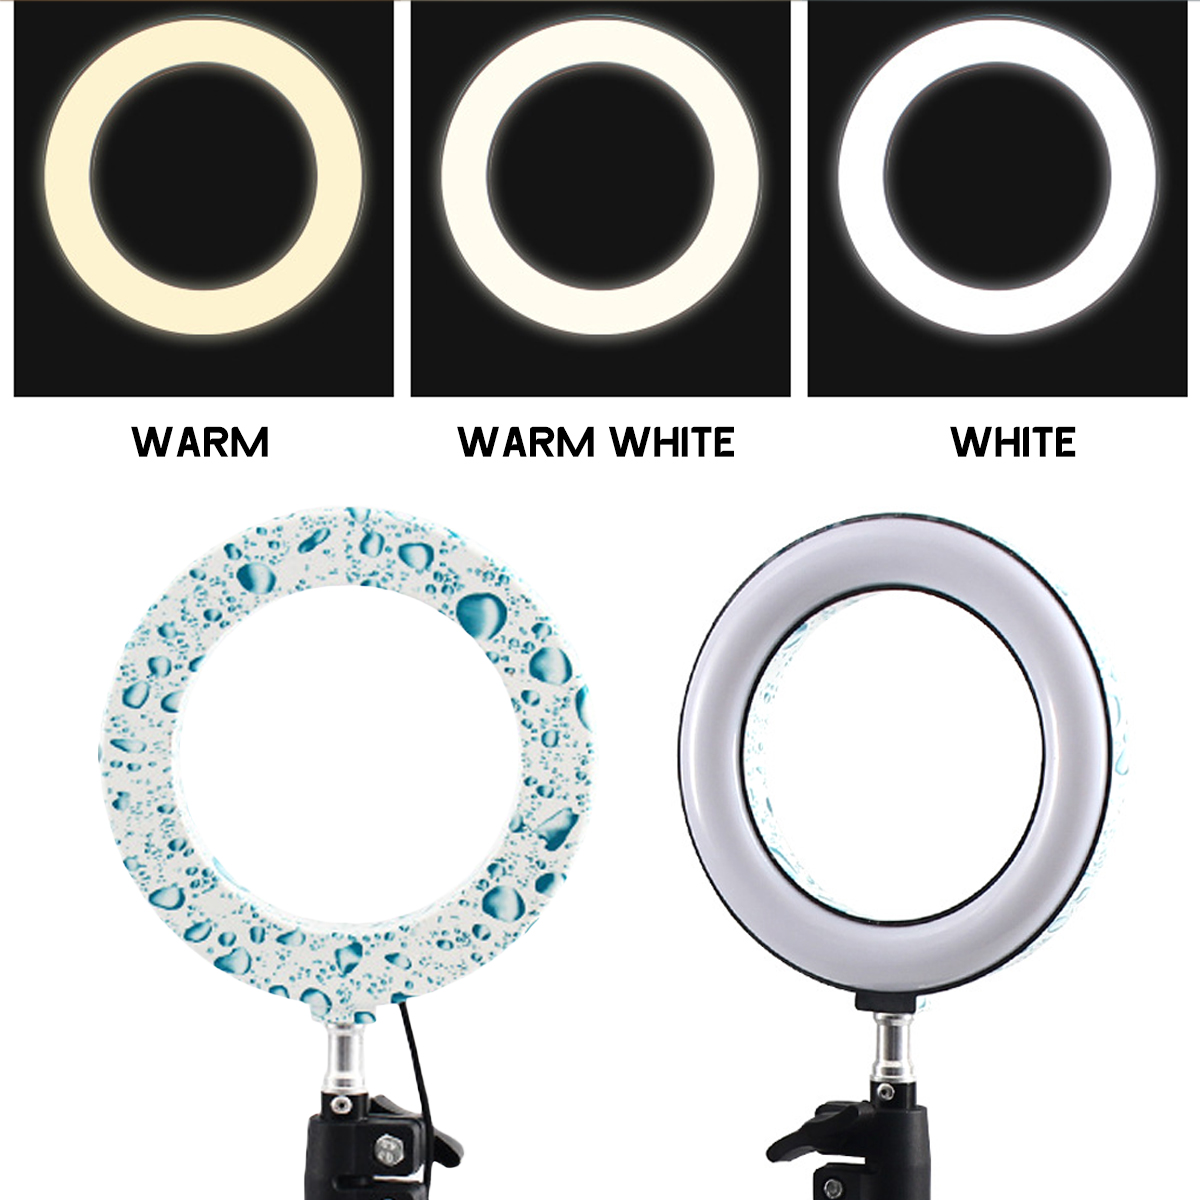 6-inch-LED-Ring-Light-Fill-Light-For-Makeup-Streaming-Selfie-Beauty-Photography-B-Makeup-Mirror-Ligh-1635732-4